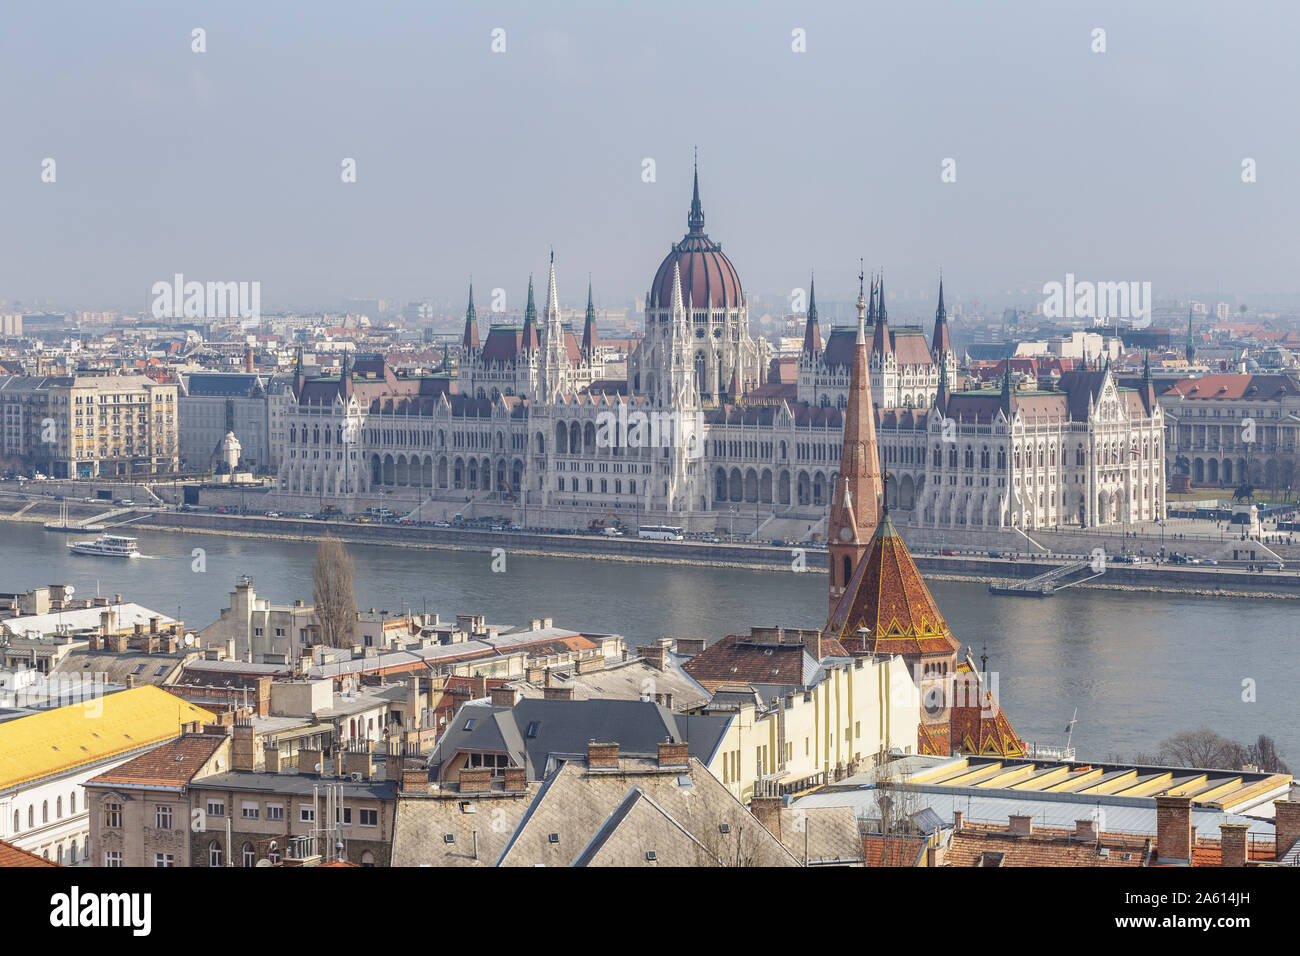 Sitting on the banks of the River Danube, the Hungarian Parliament Building in dates from the late 19th century, UNESCO, Budapest, Hungary, Europe Stock Photo